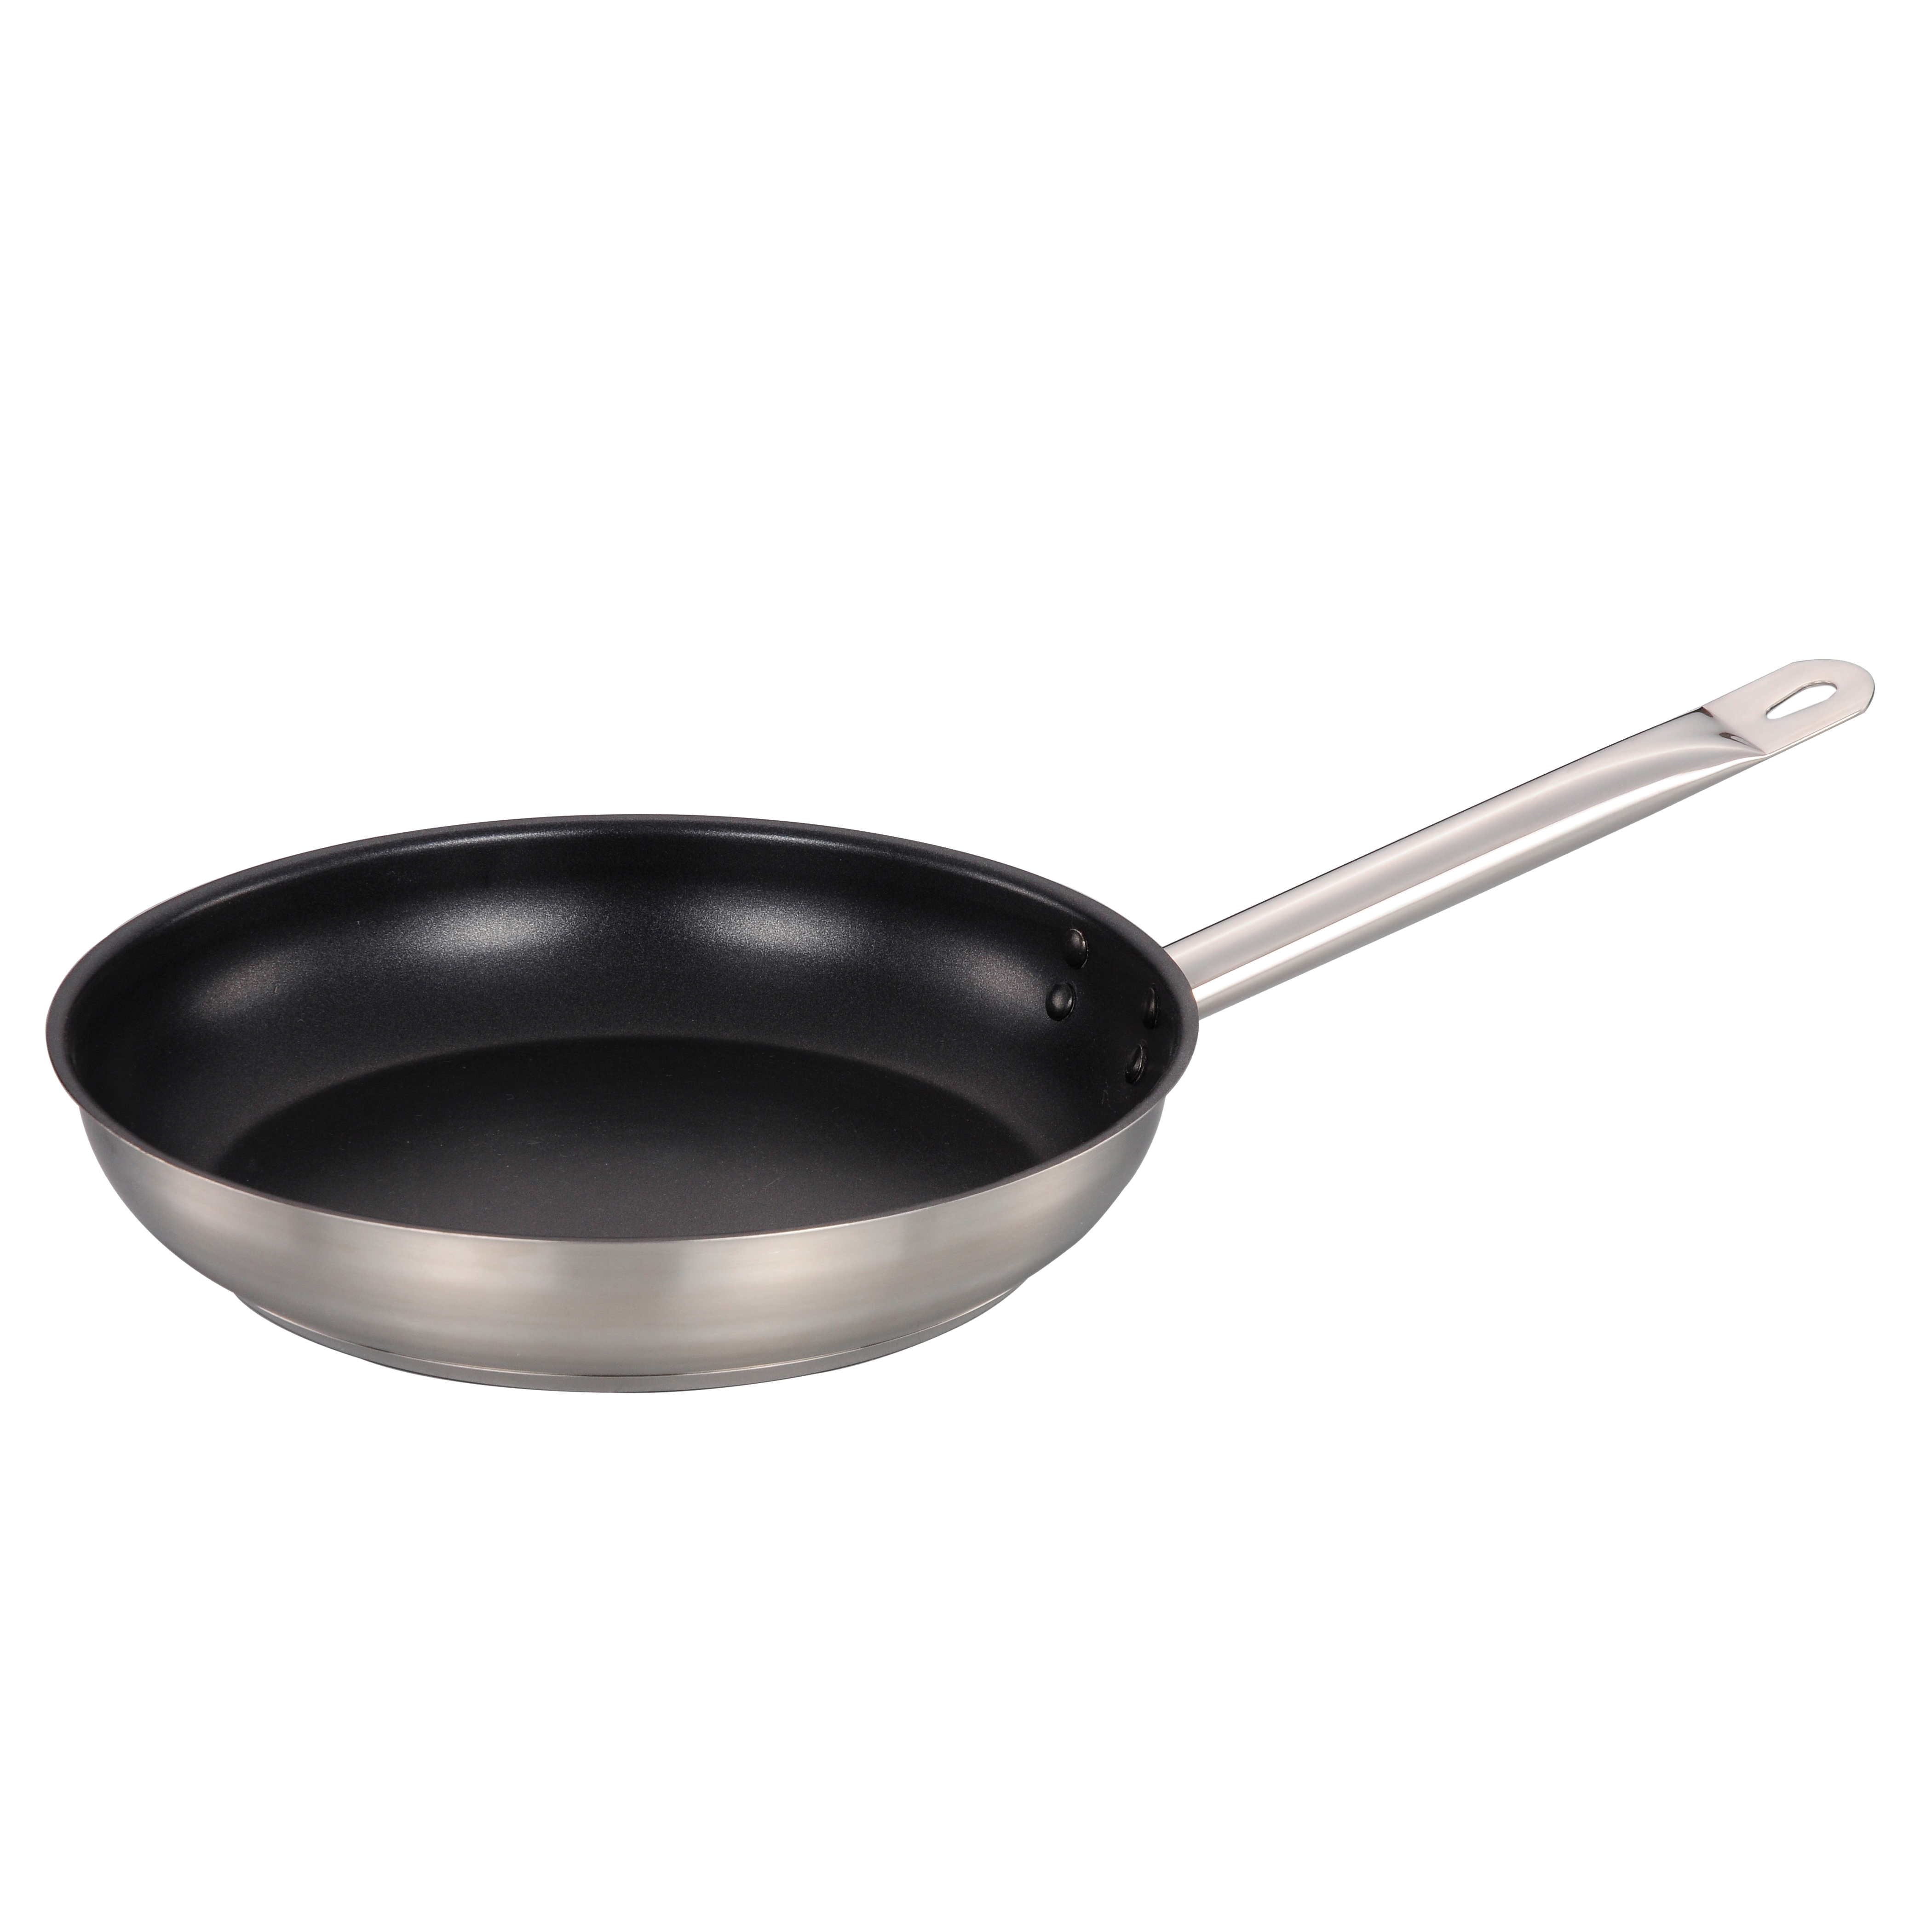 11 Inch Non Stick Stainless Steel Fry Pan Omcan